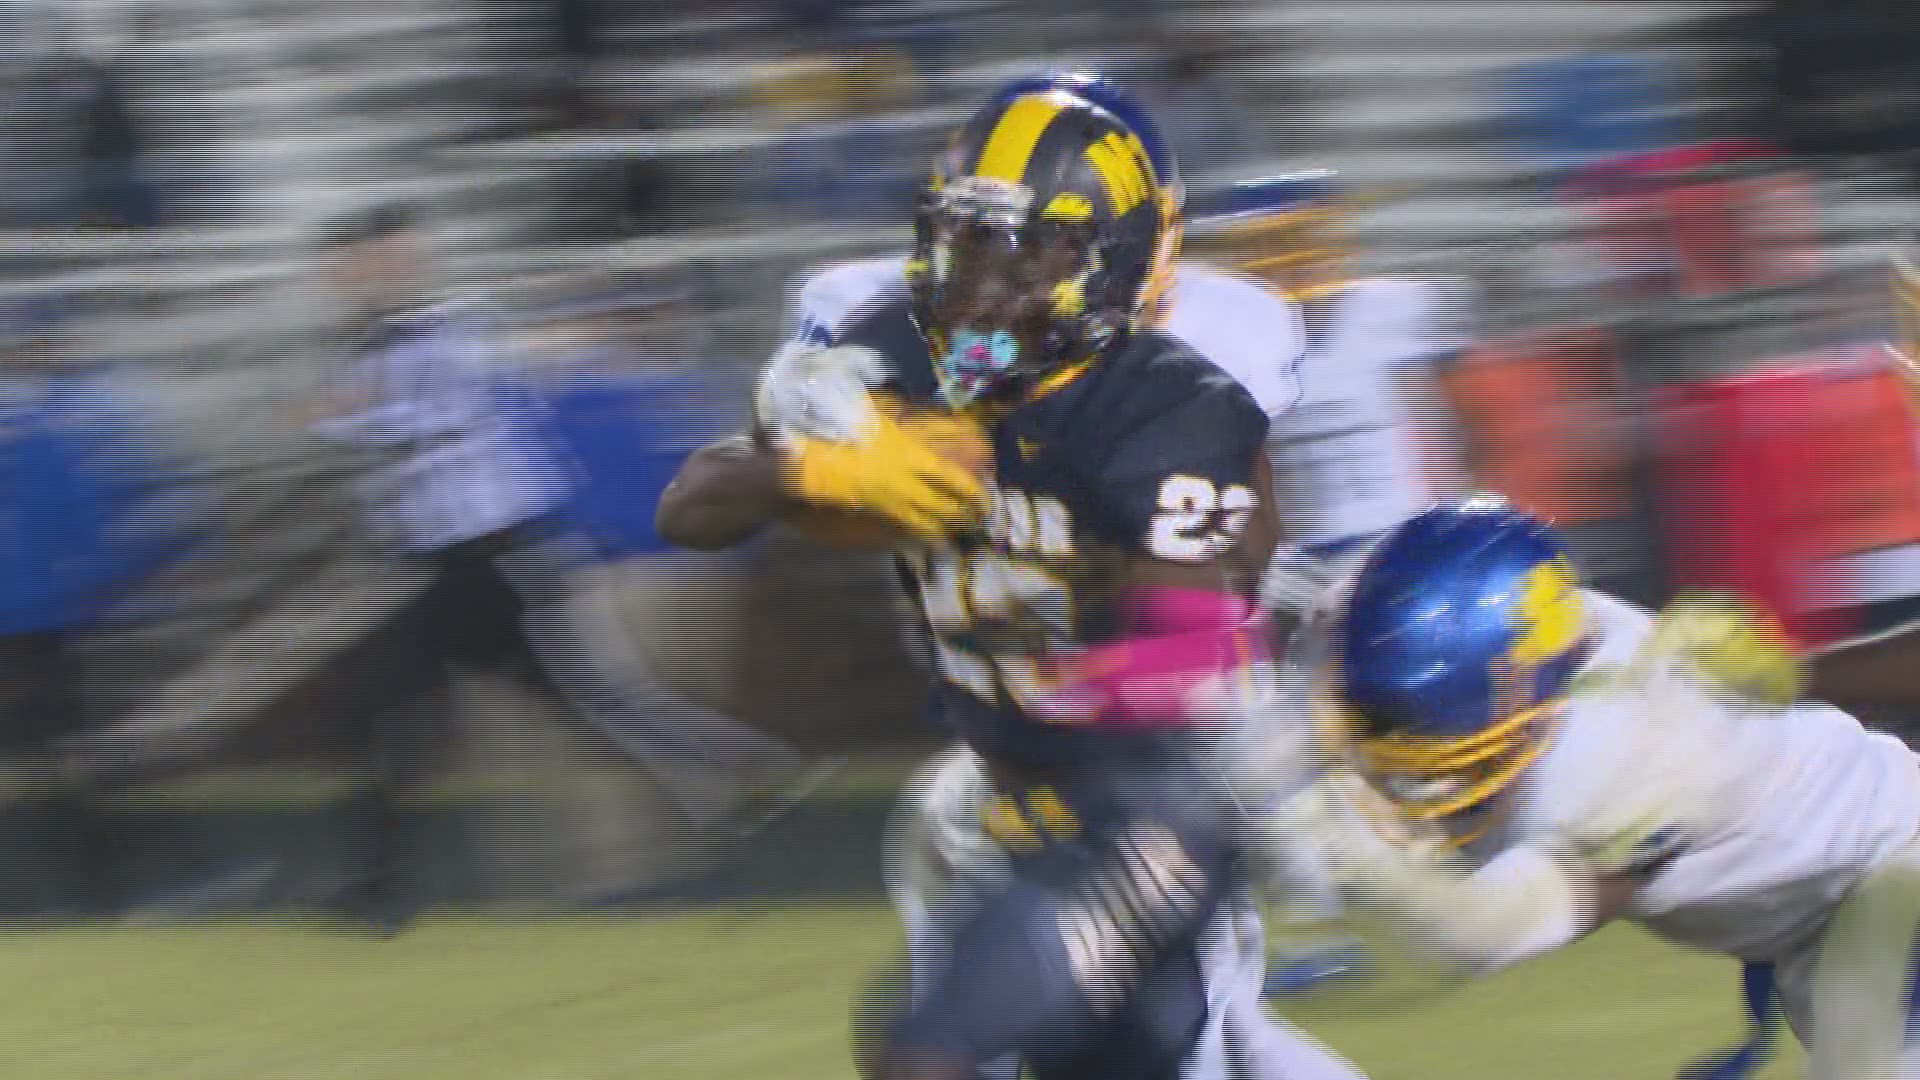 Mount Tabor Rallies To Get The 21-20 Win